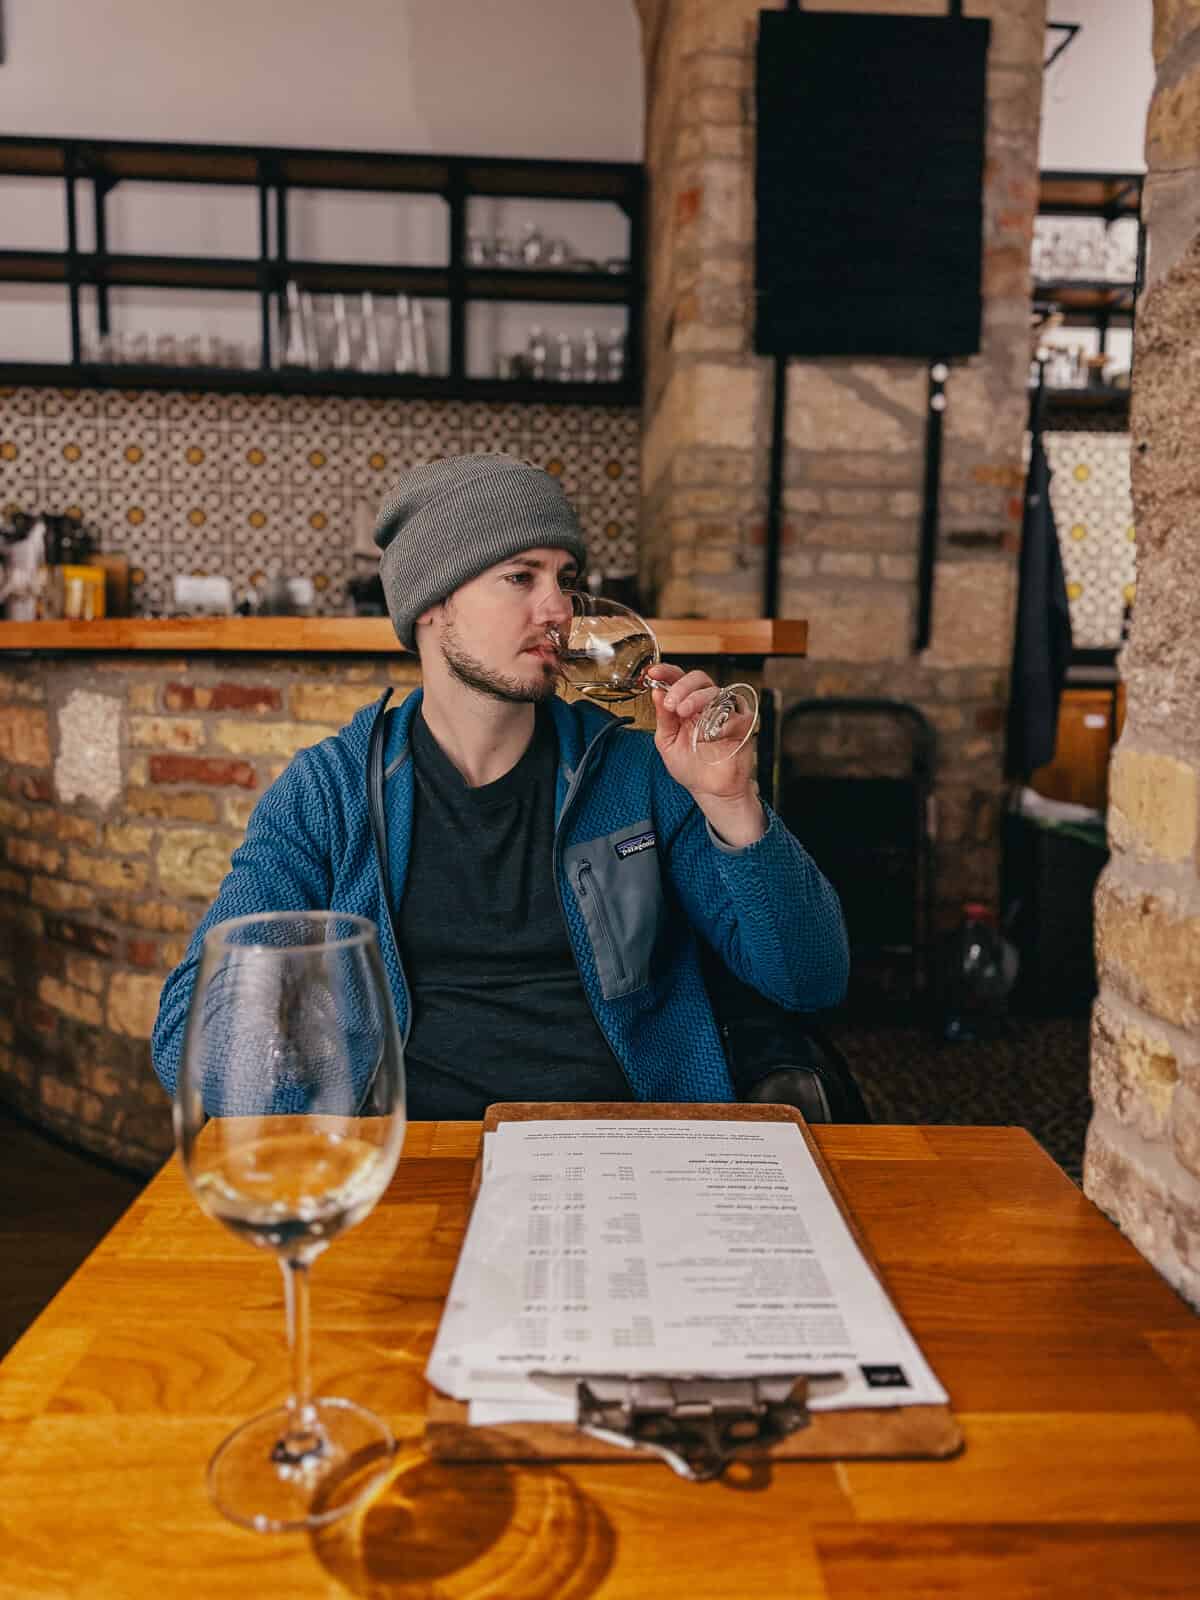 A man in a gray beanie and blue jacket is tasting white wine inside a rustic restaurant with brick and tiled walls.